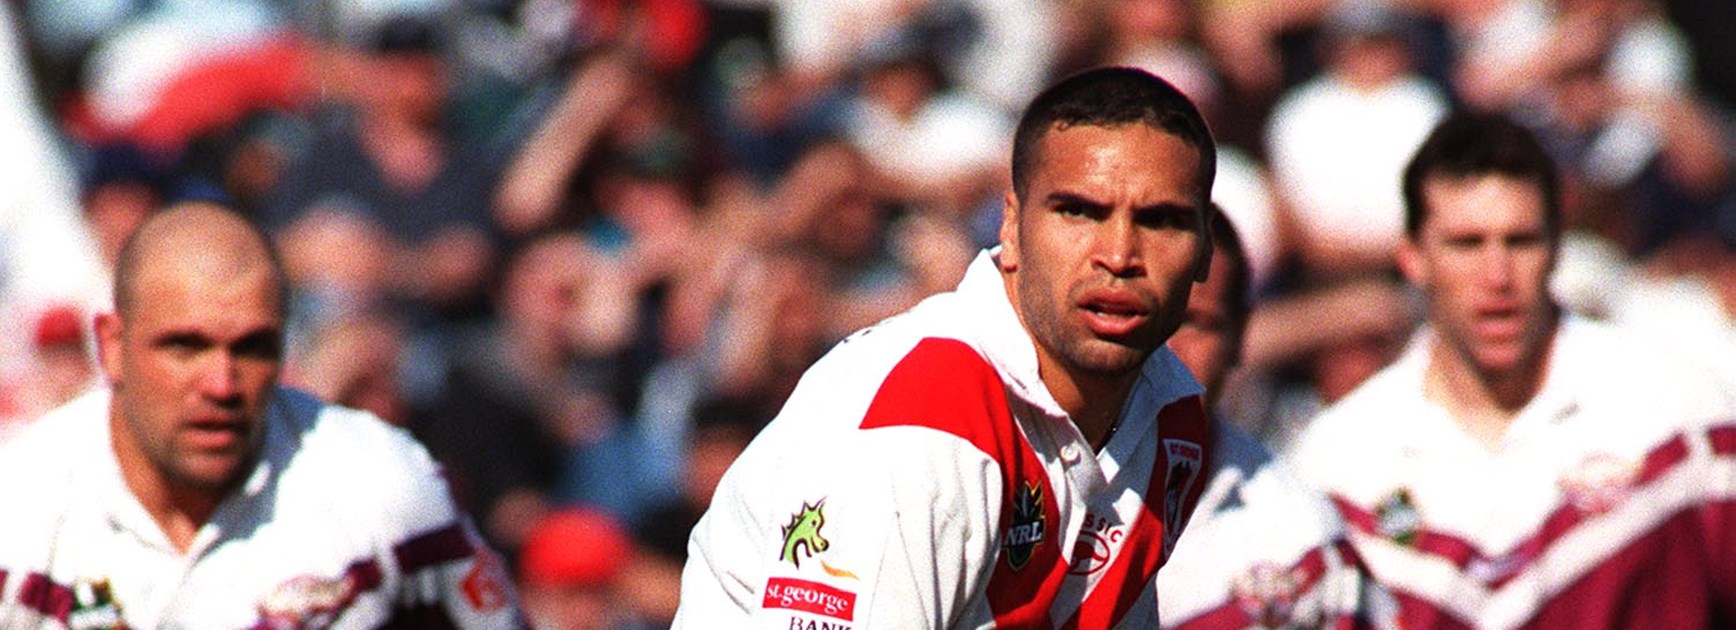 Anthony Mundine left rugby league midway through the 2000 season to take up boxing where he became a four-time world champion. Fought in many of Australia’s biggest bouts and beat Danny Green at SFS in 2006. He is preparing to take on legendary Muay Thai fighter John Wayne Parr at Cbus Super Stadium on November 30.